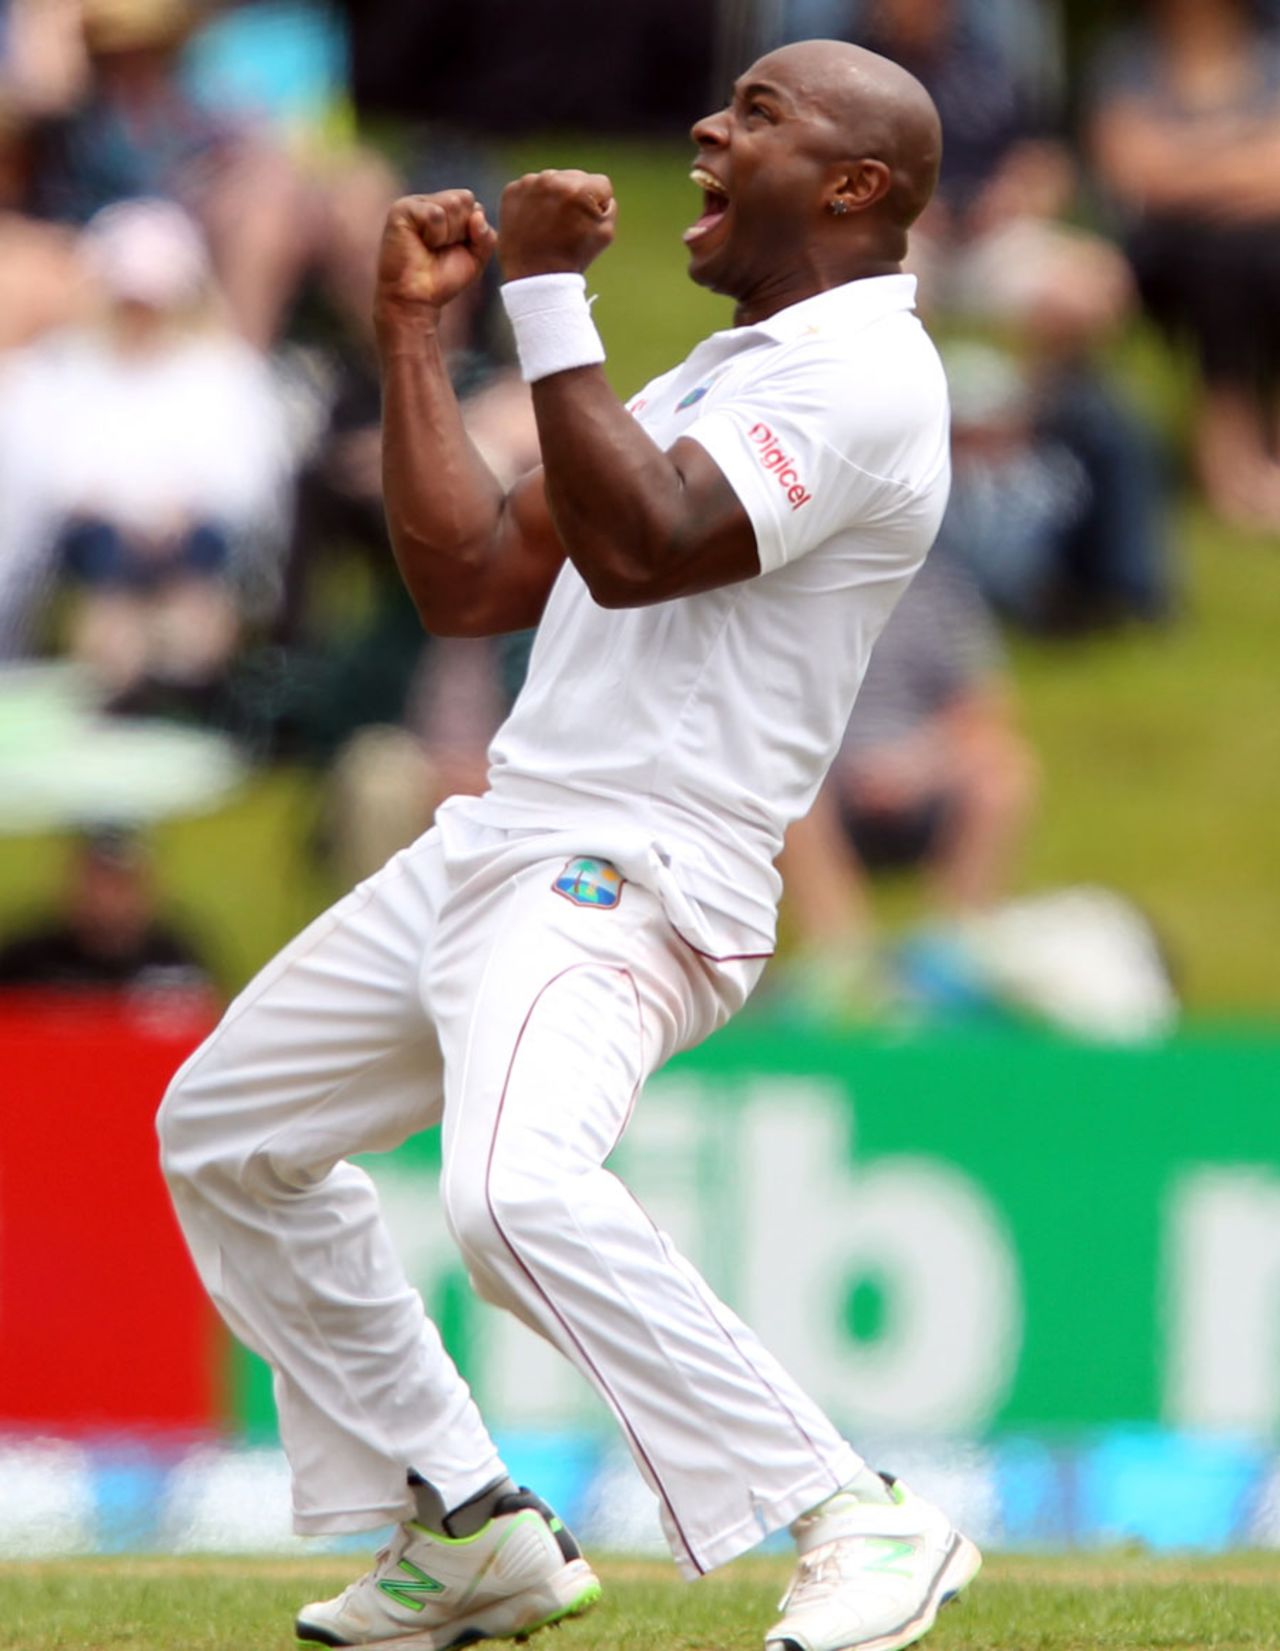 Tino Best roars after picking up a wicket, New Zealand v West Indies, 1st Test, Dunedin, 1st day, December 3, 2013